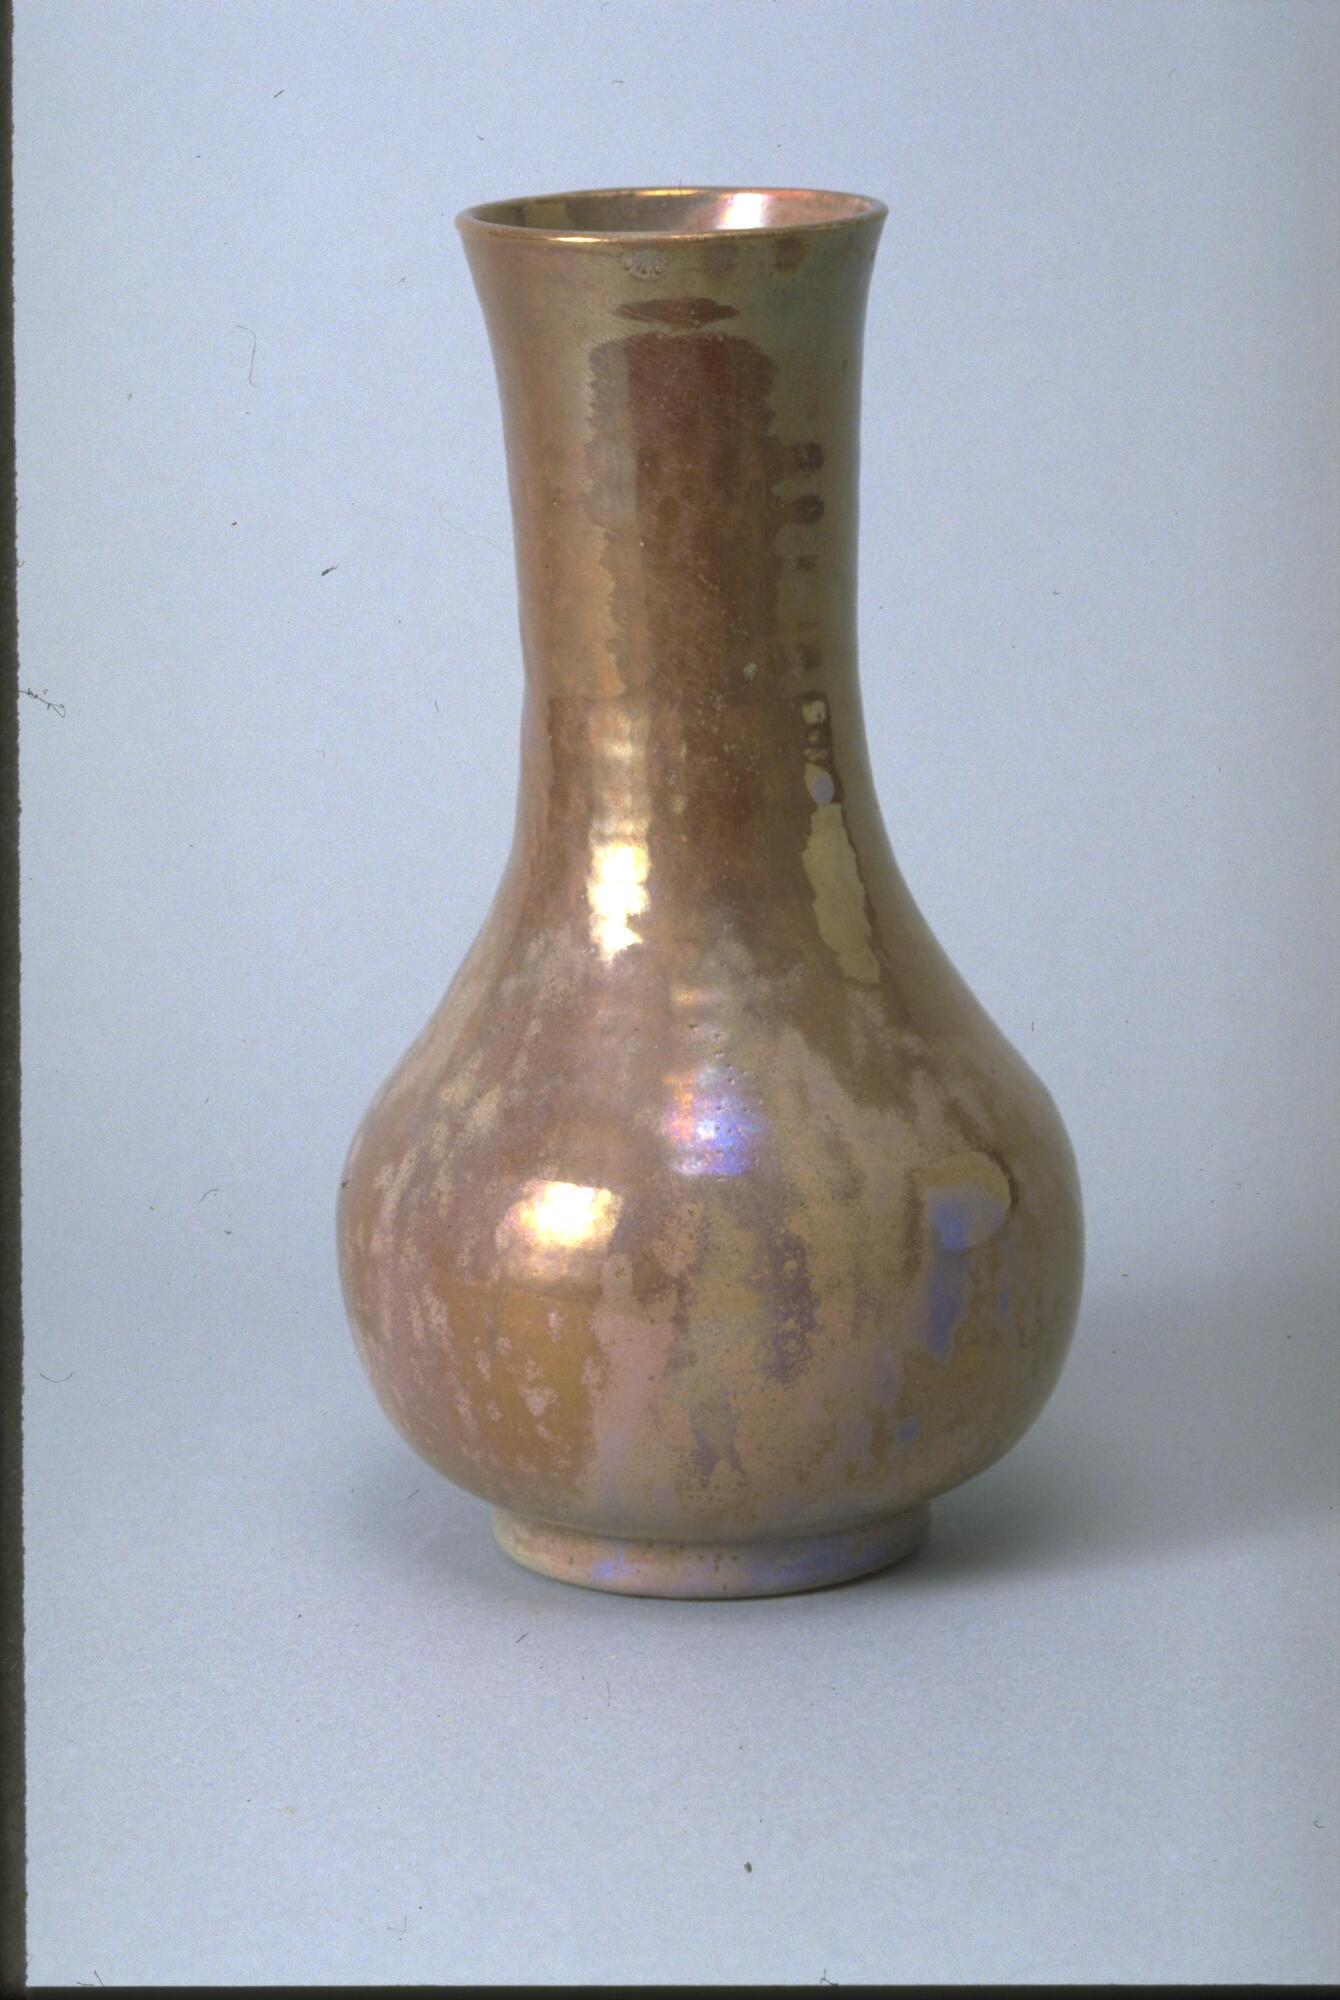 Bottle-shaped vessel with foot, bulbous body and long neck covered in an iridescent light brown-ish glaze